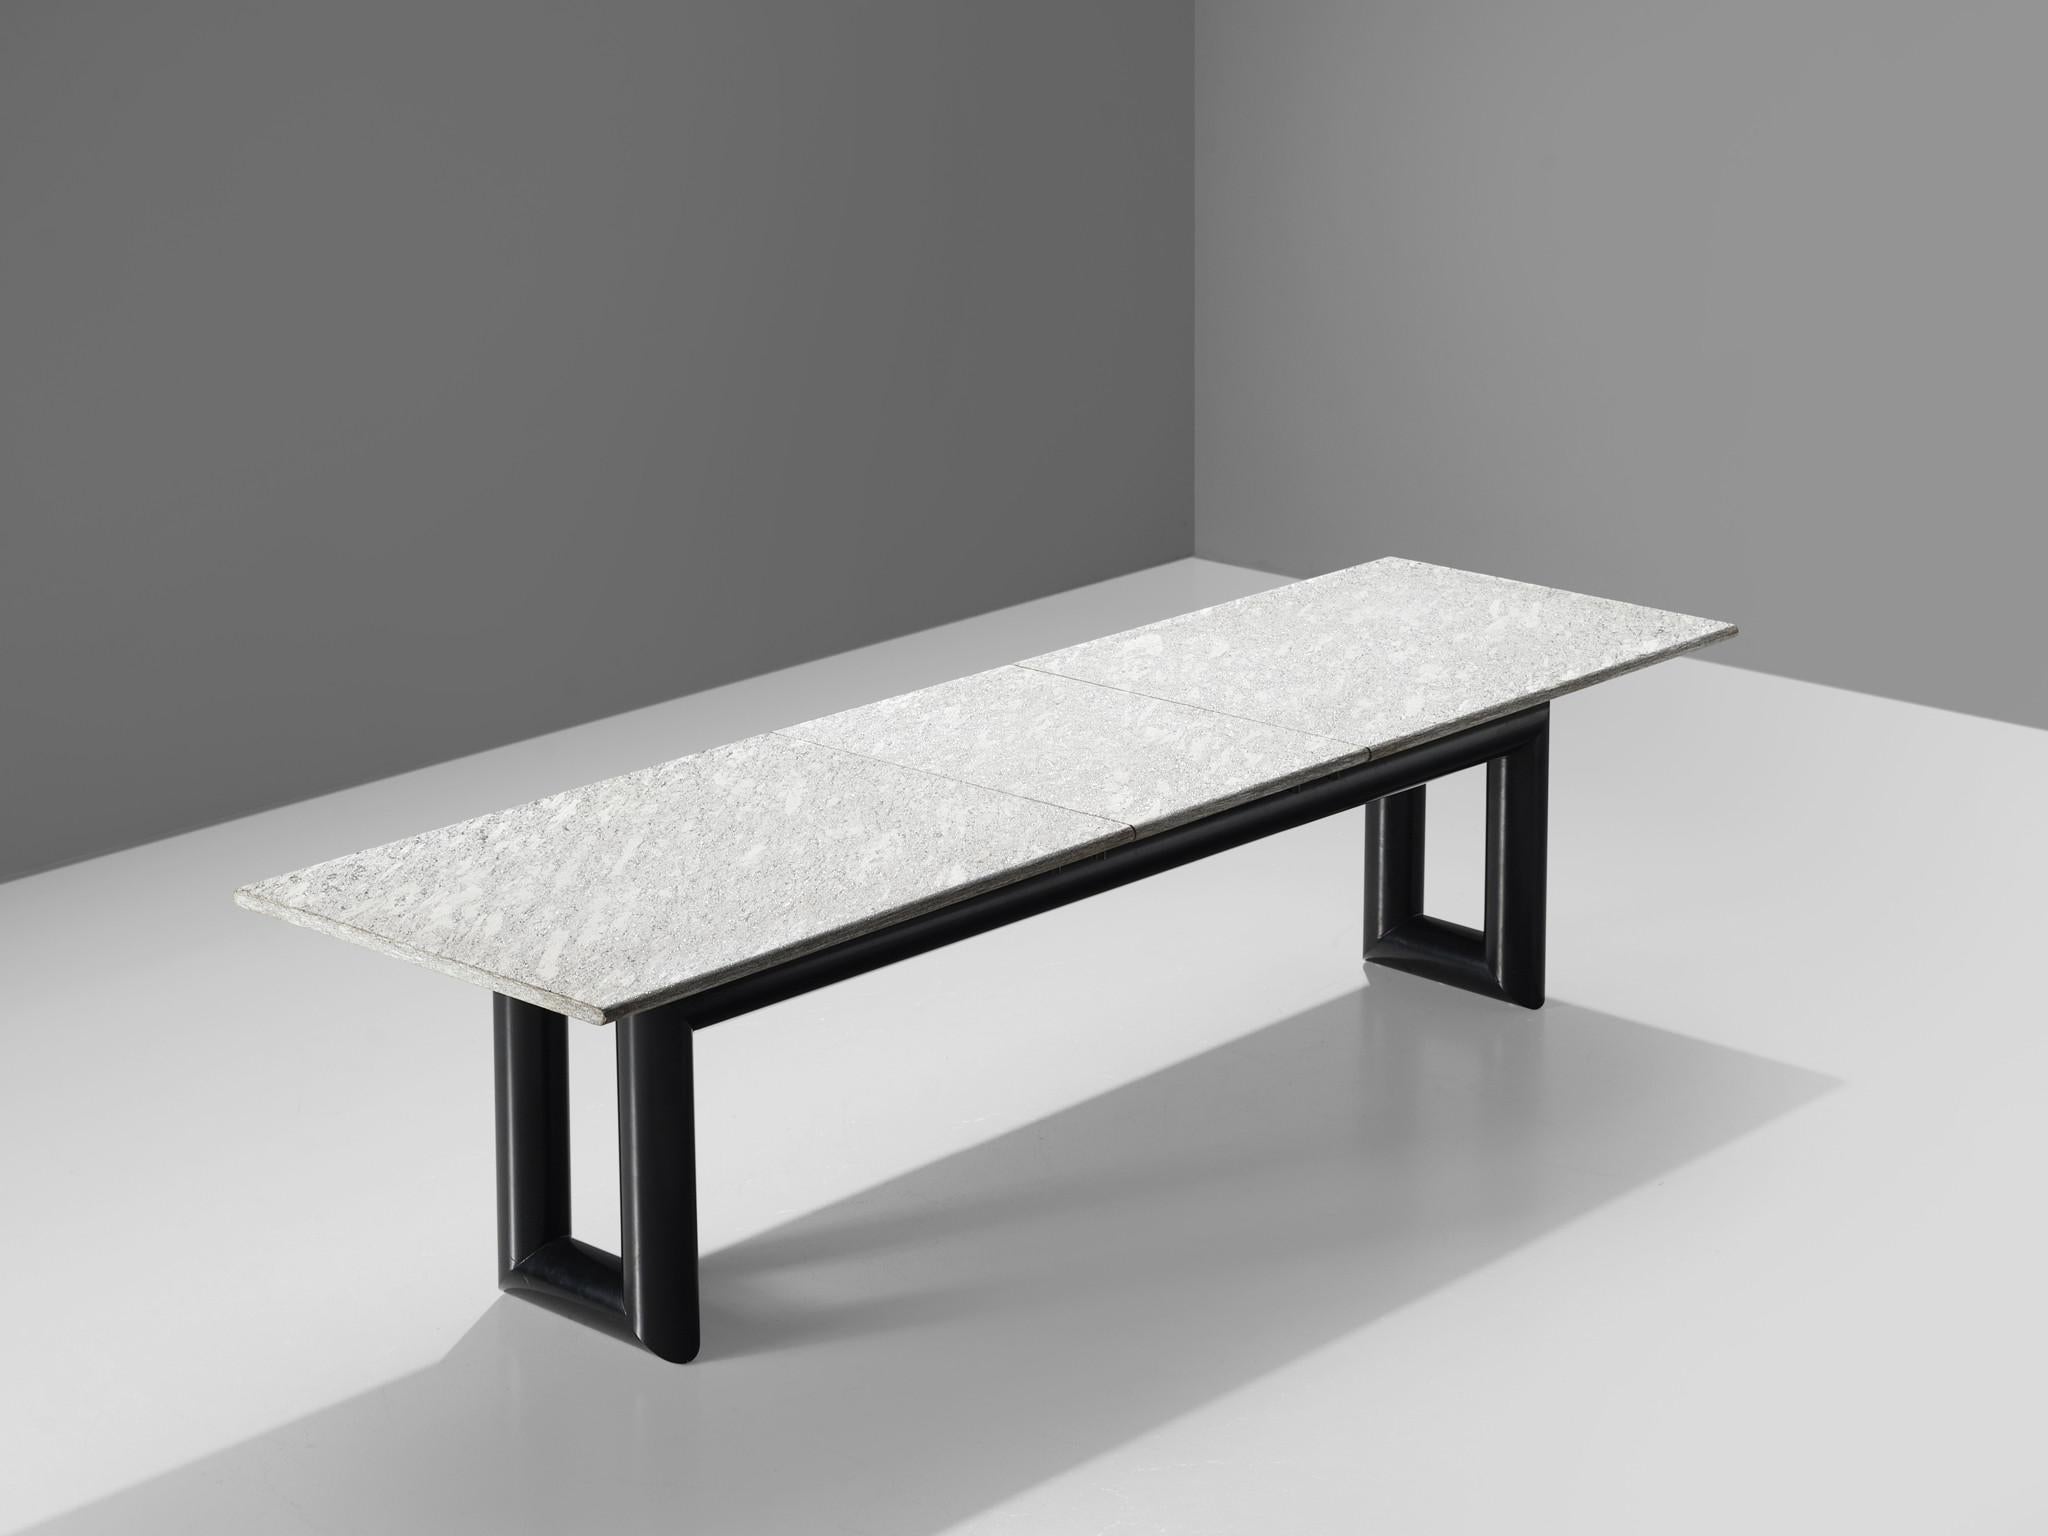 Mario Botta for Alias, conference table, metal and stone, Italy, 1983.

This sturdy table features two u shaped thick metal legs and a large, solid grey marble top. The metal base is painted black and forms a wonderful contrast with the long